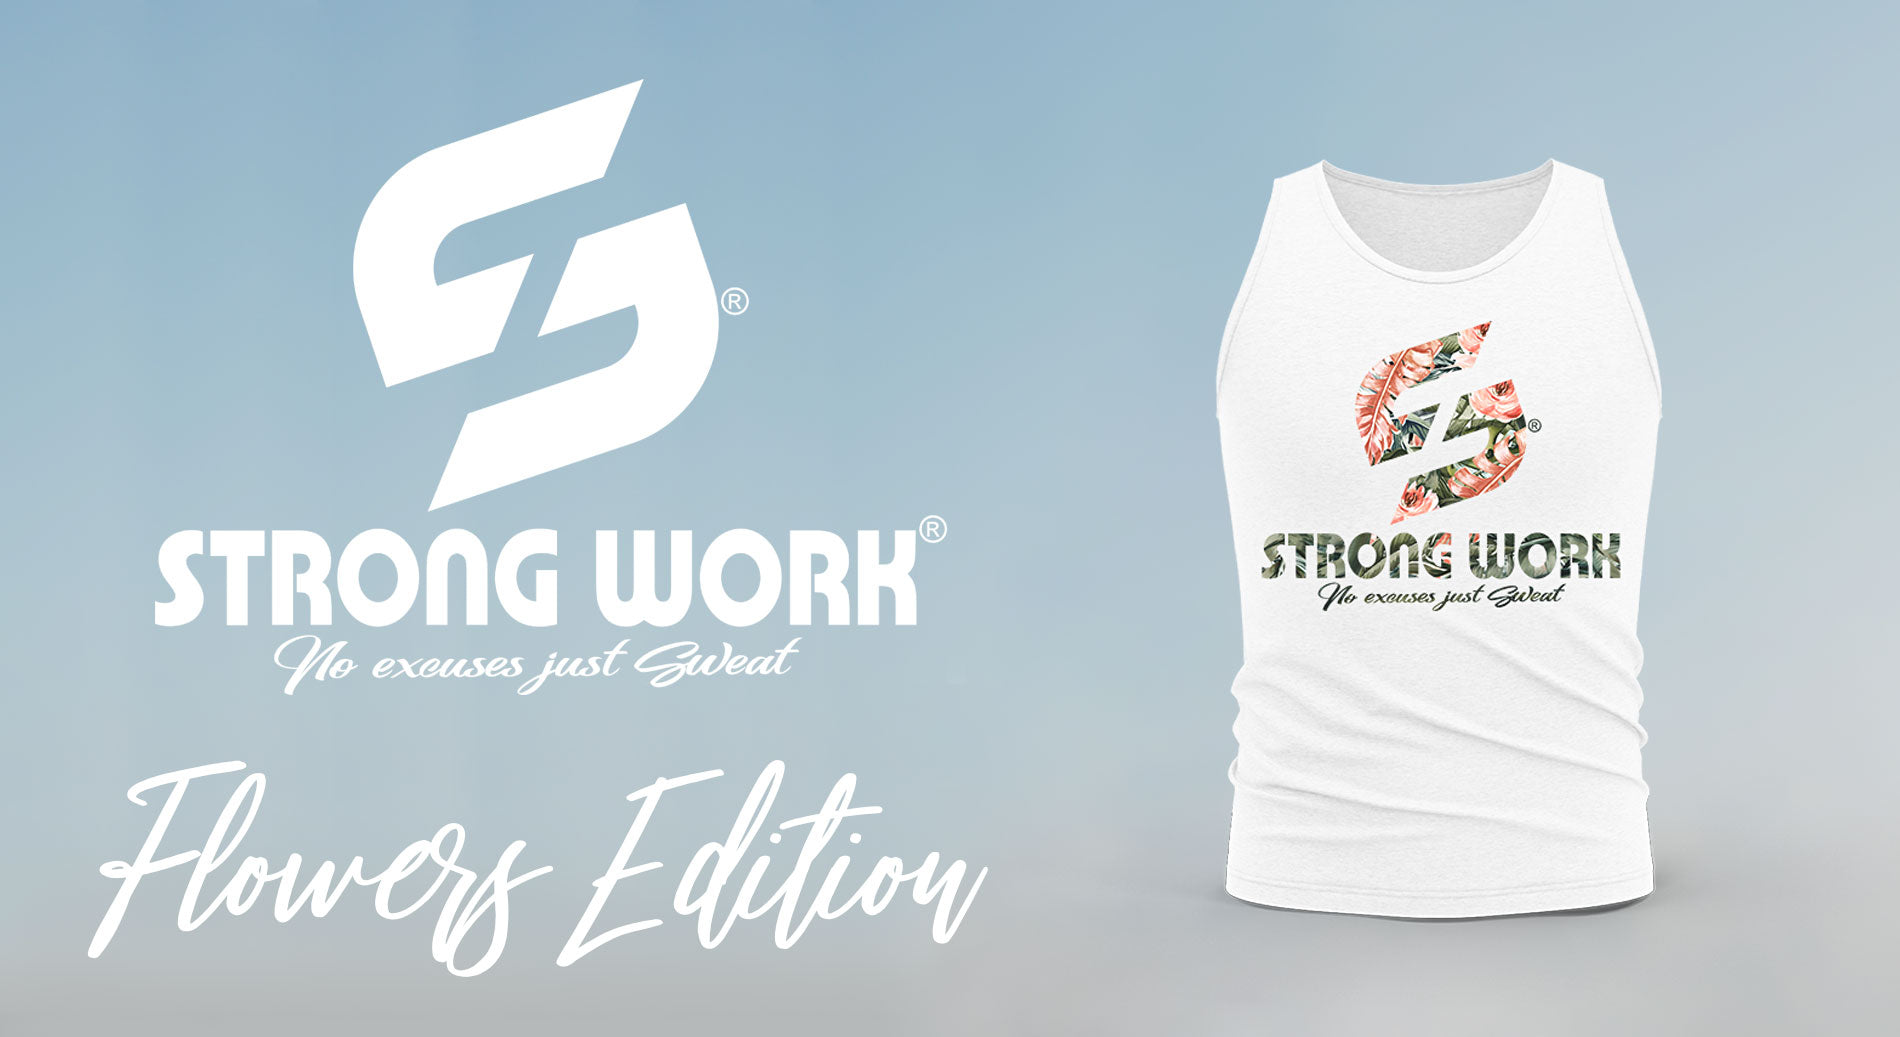 STRONG WORK FLOWERS EDITION FOR MEN - SUSTAINABLE SPORTSWEAR